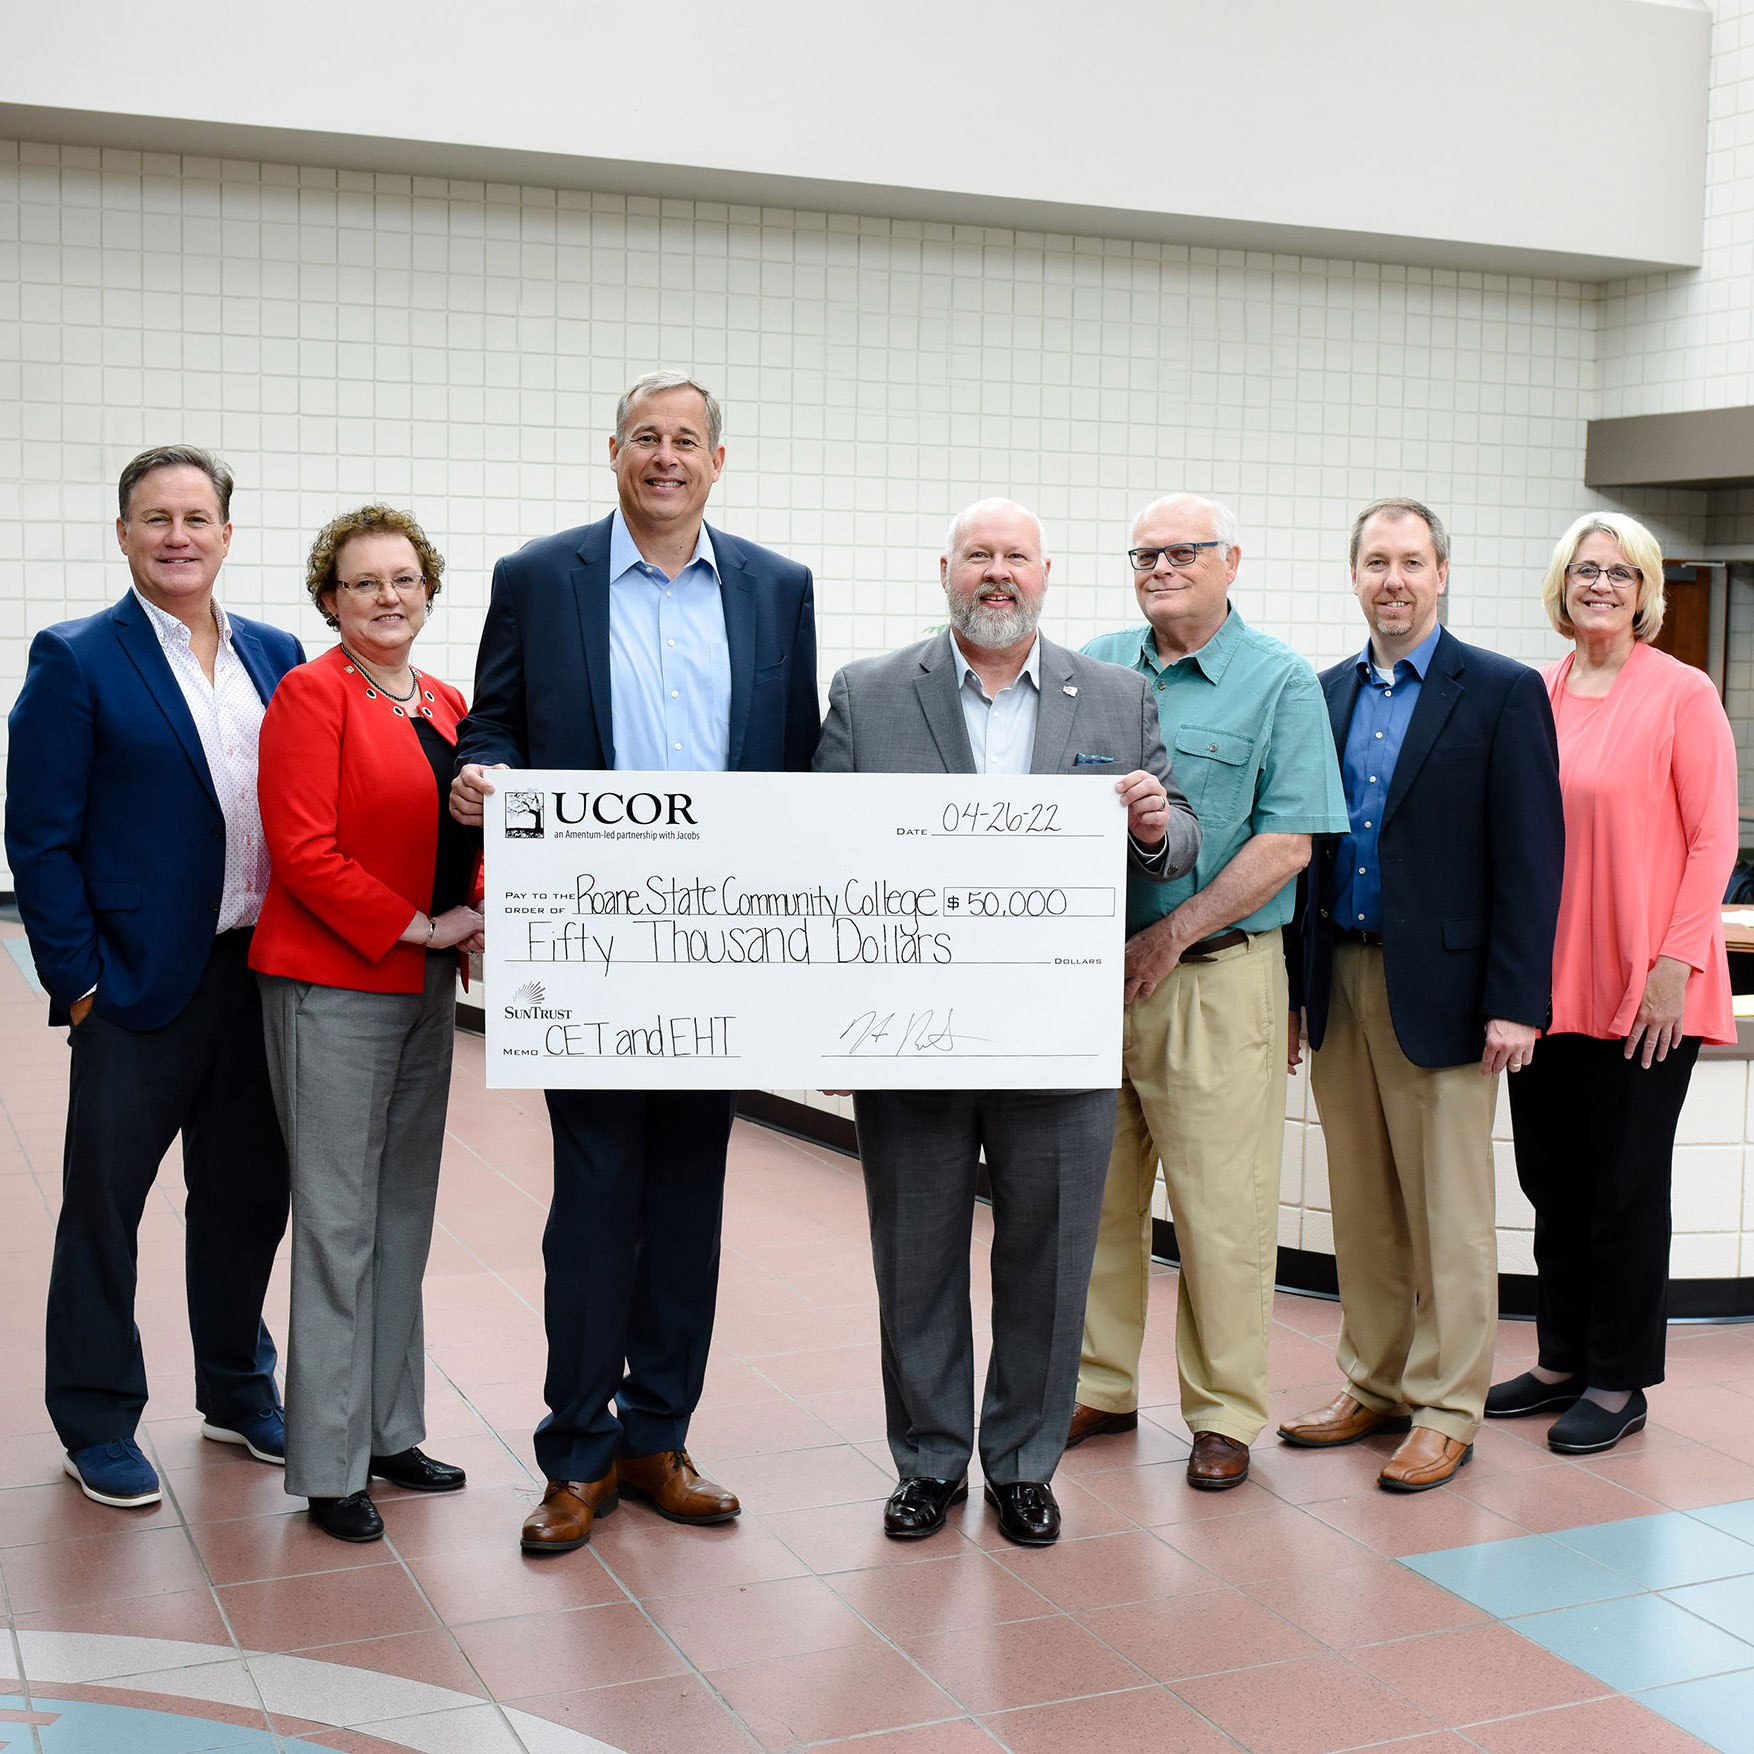 Roane State and UCOR representatives pose for a photo following a check presentation for $50,000 that will be split between the CET and EHT programs.